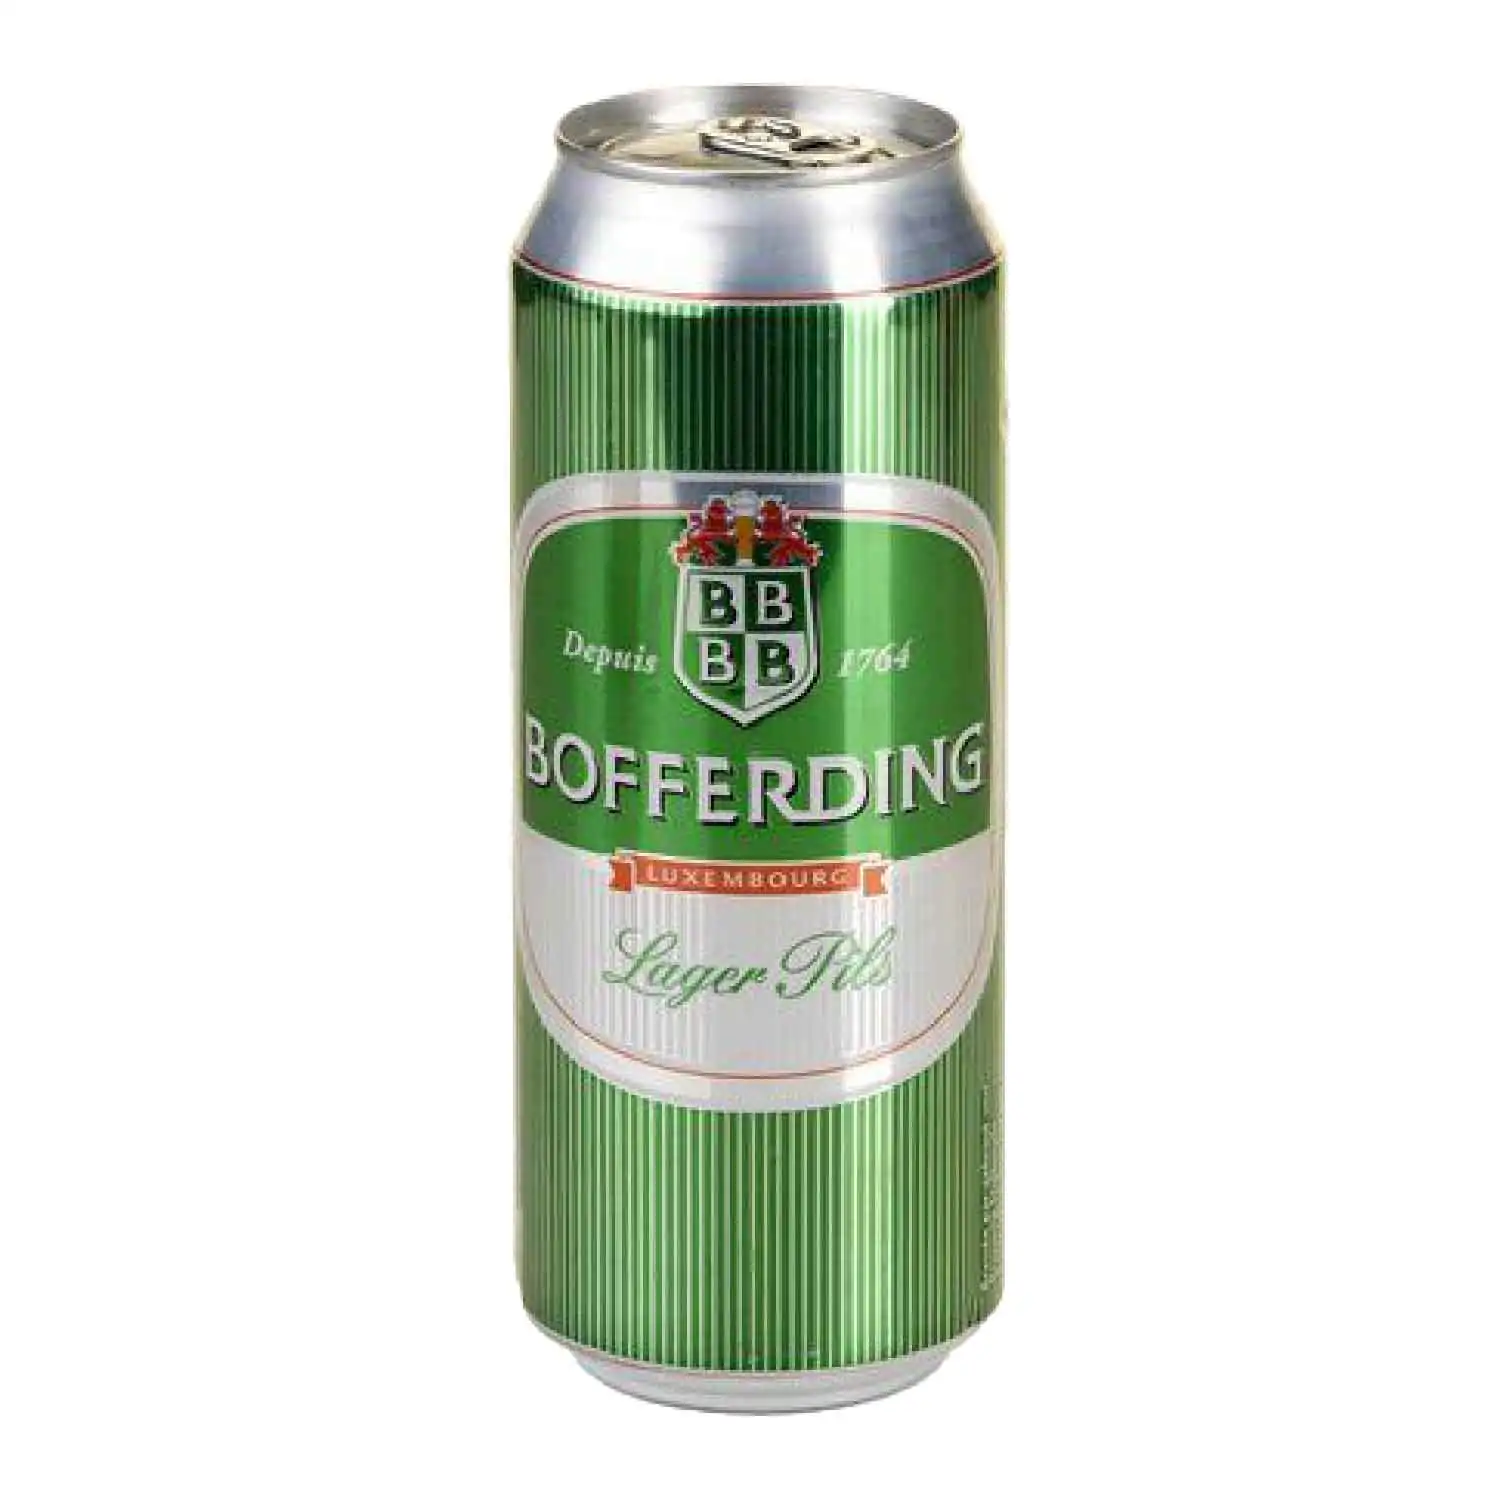 Bofferding pils tradition 50cl Alc 4,8% - Buy at Real Tobacco